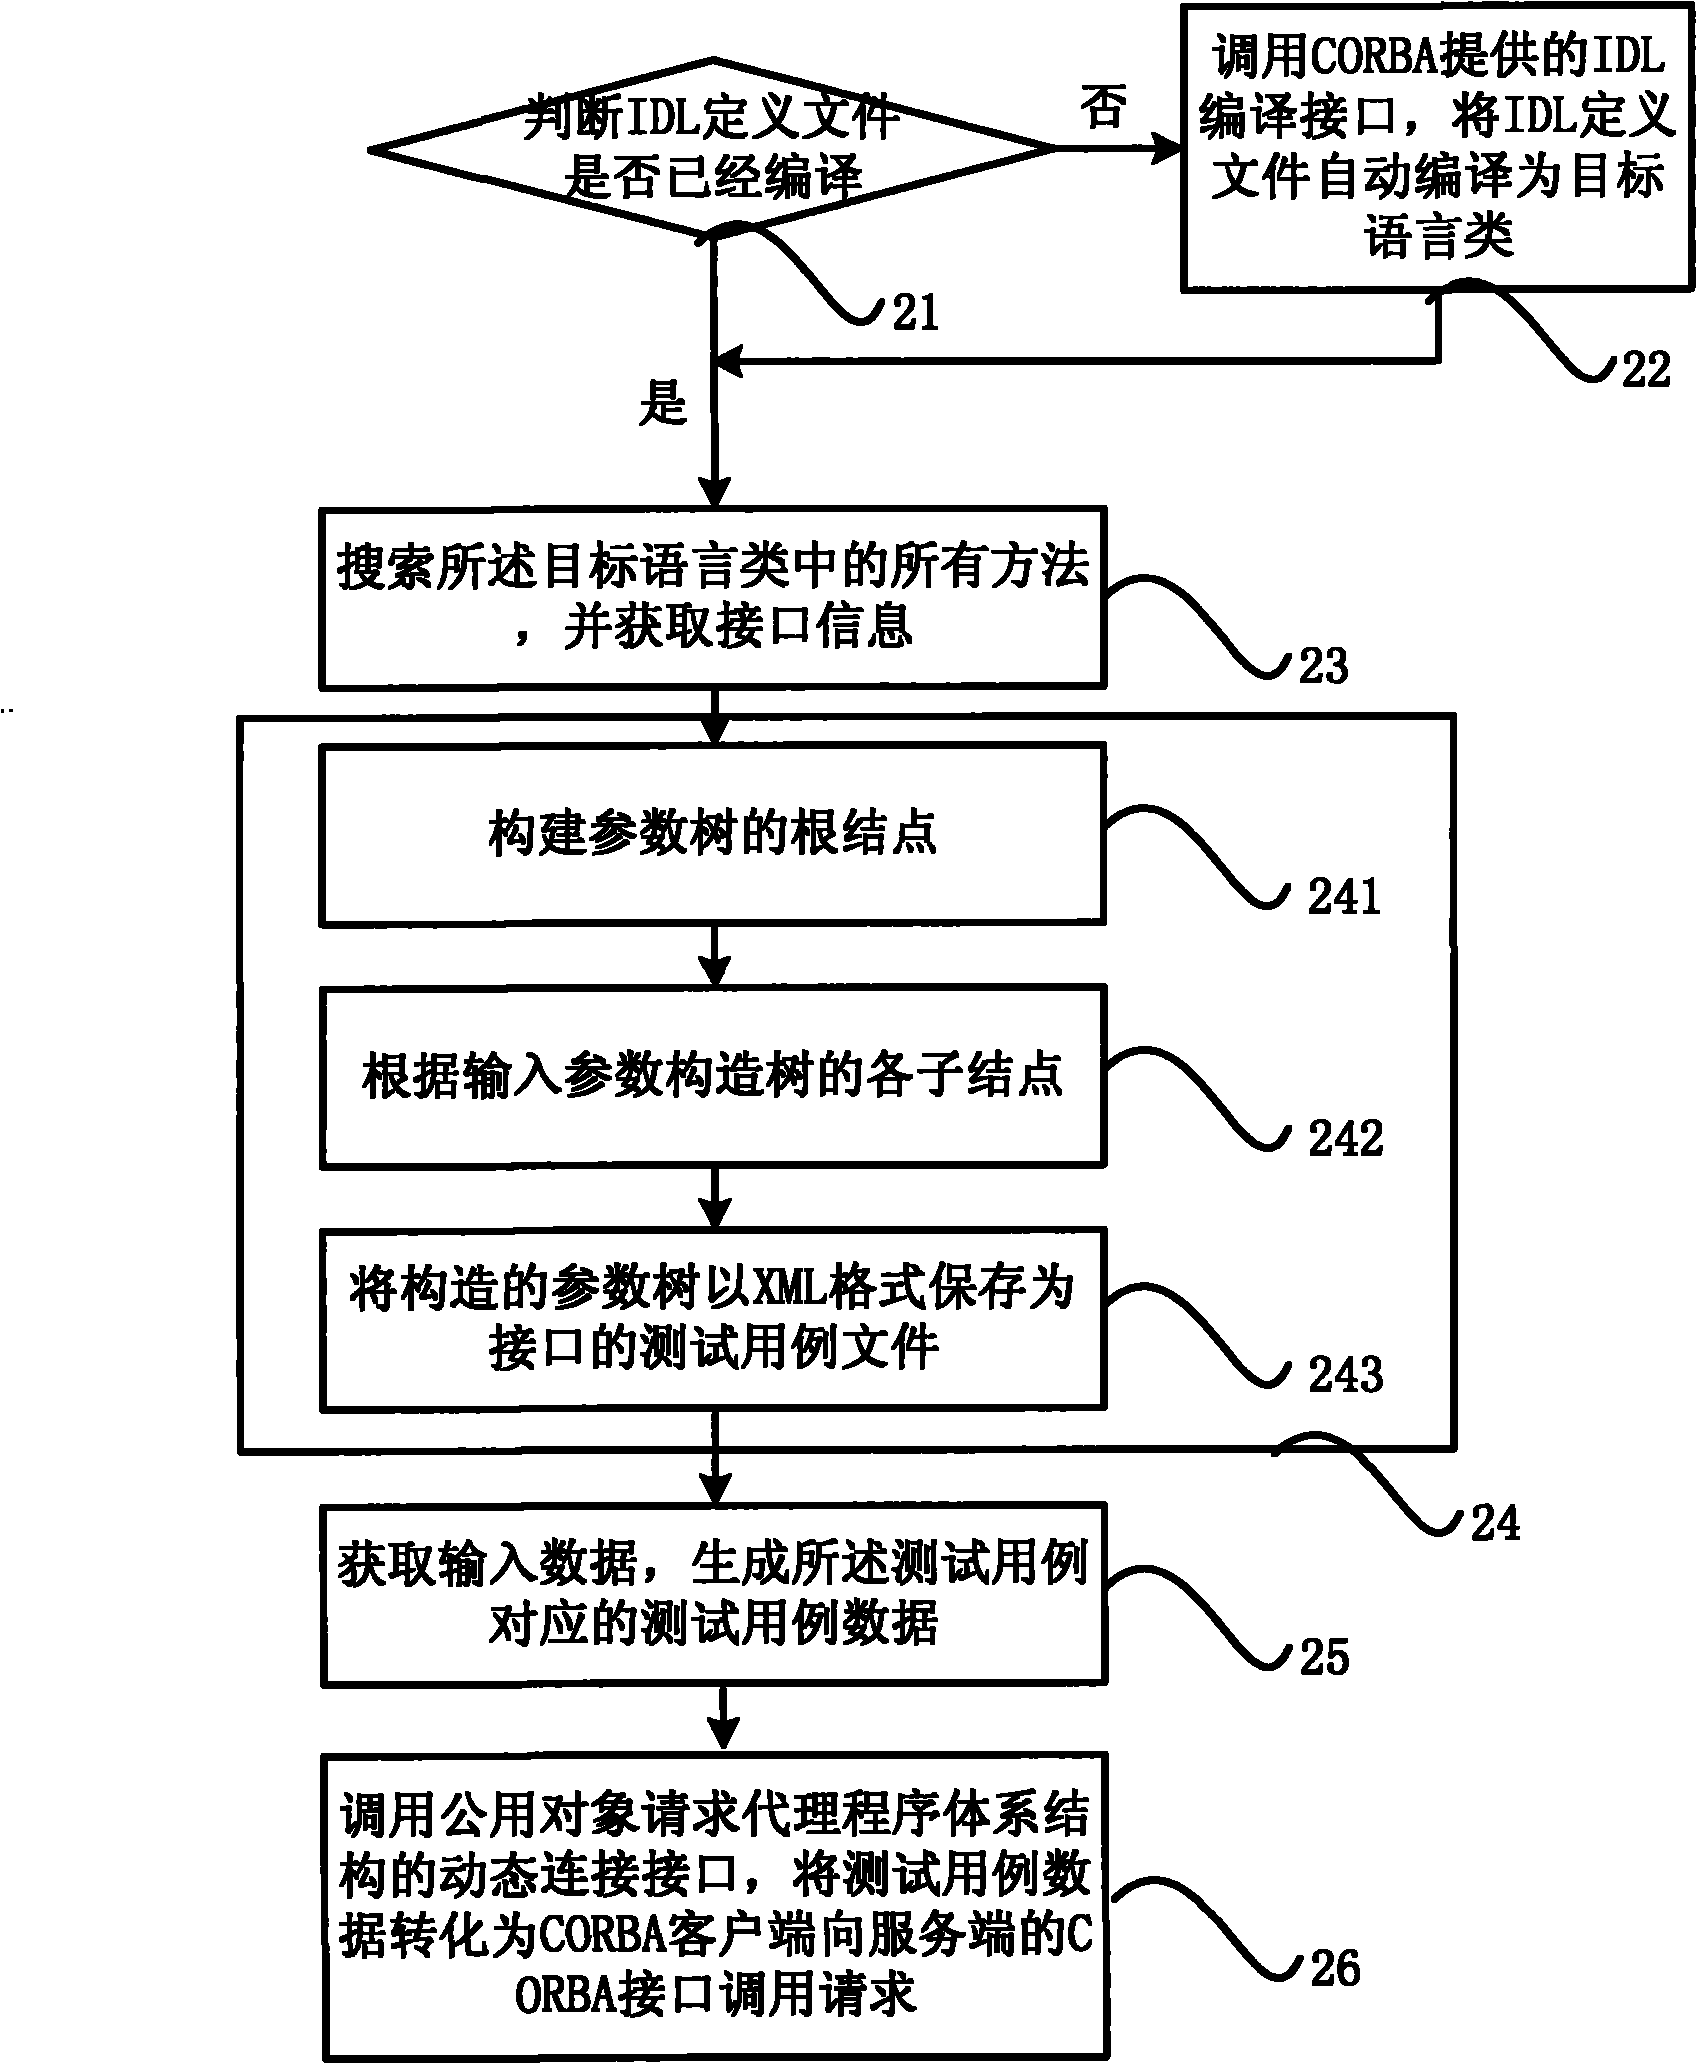 Method and device for automatically testing common object request broker architecture (CORBA) interfaces